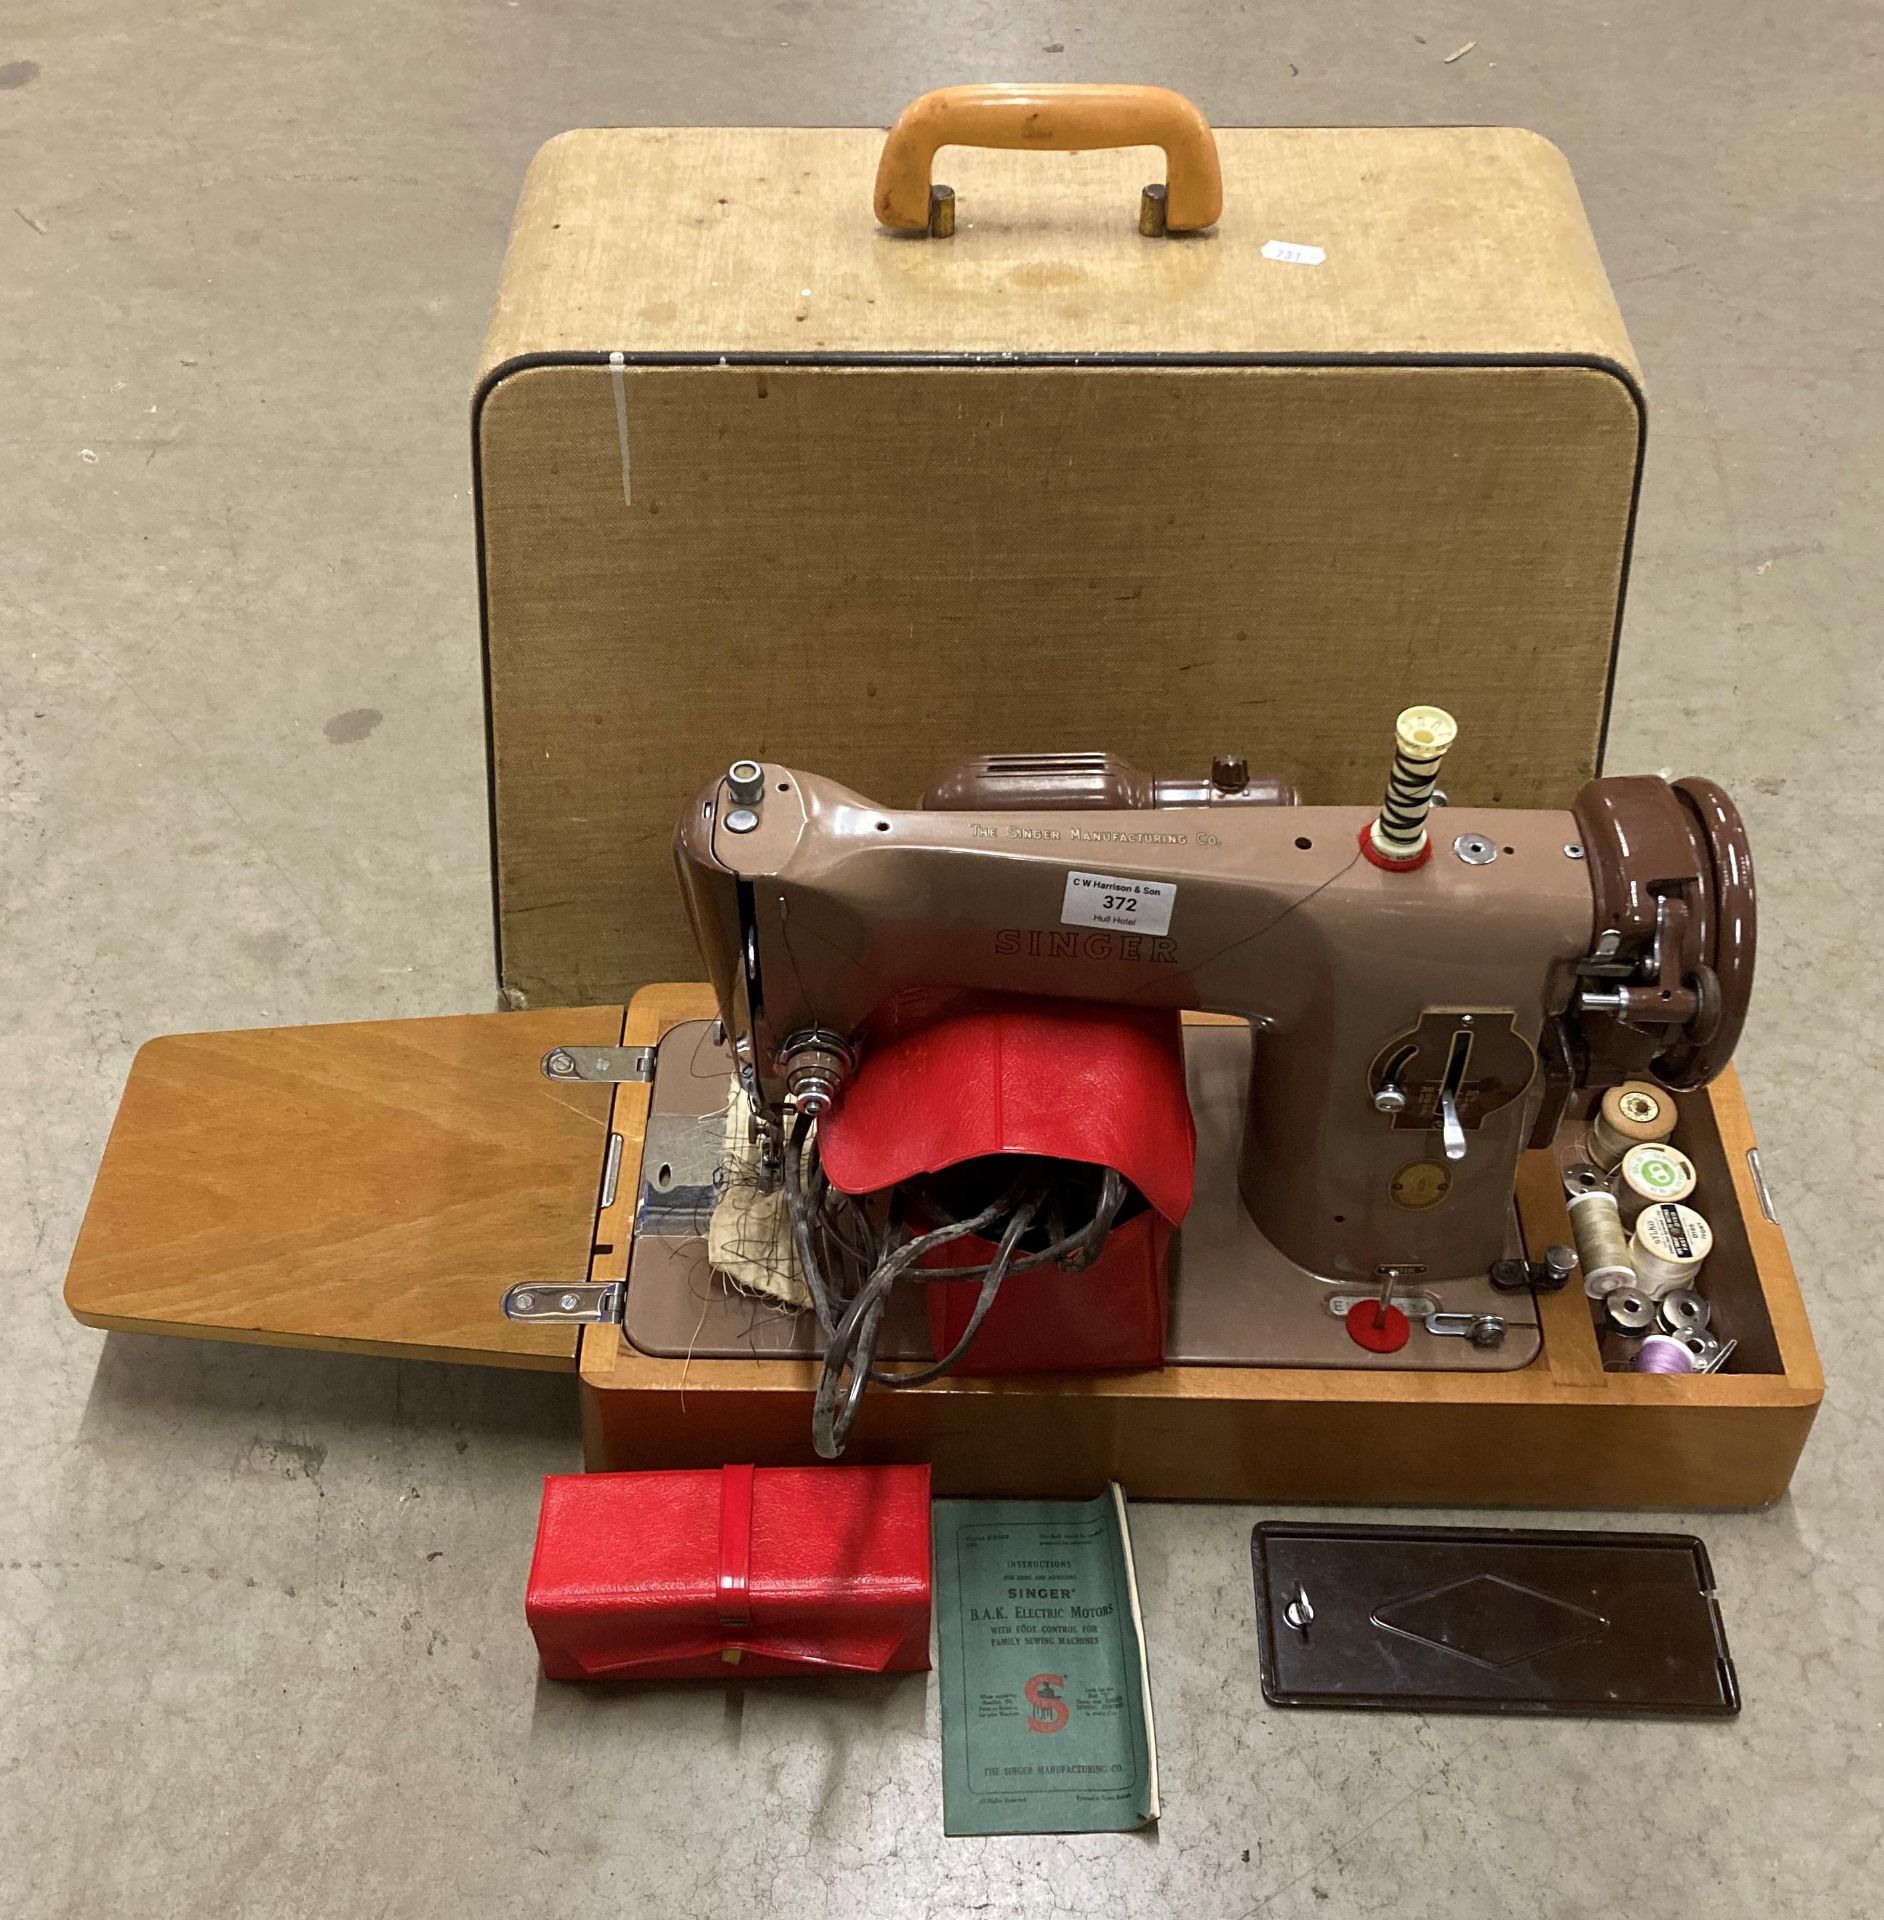 Singer 2016 electric foot-operated sewing machine in carry case (saleroom location: P03-2)